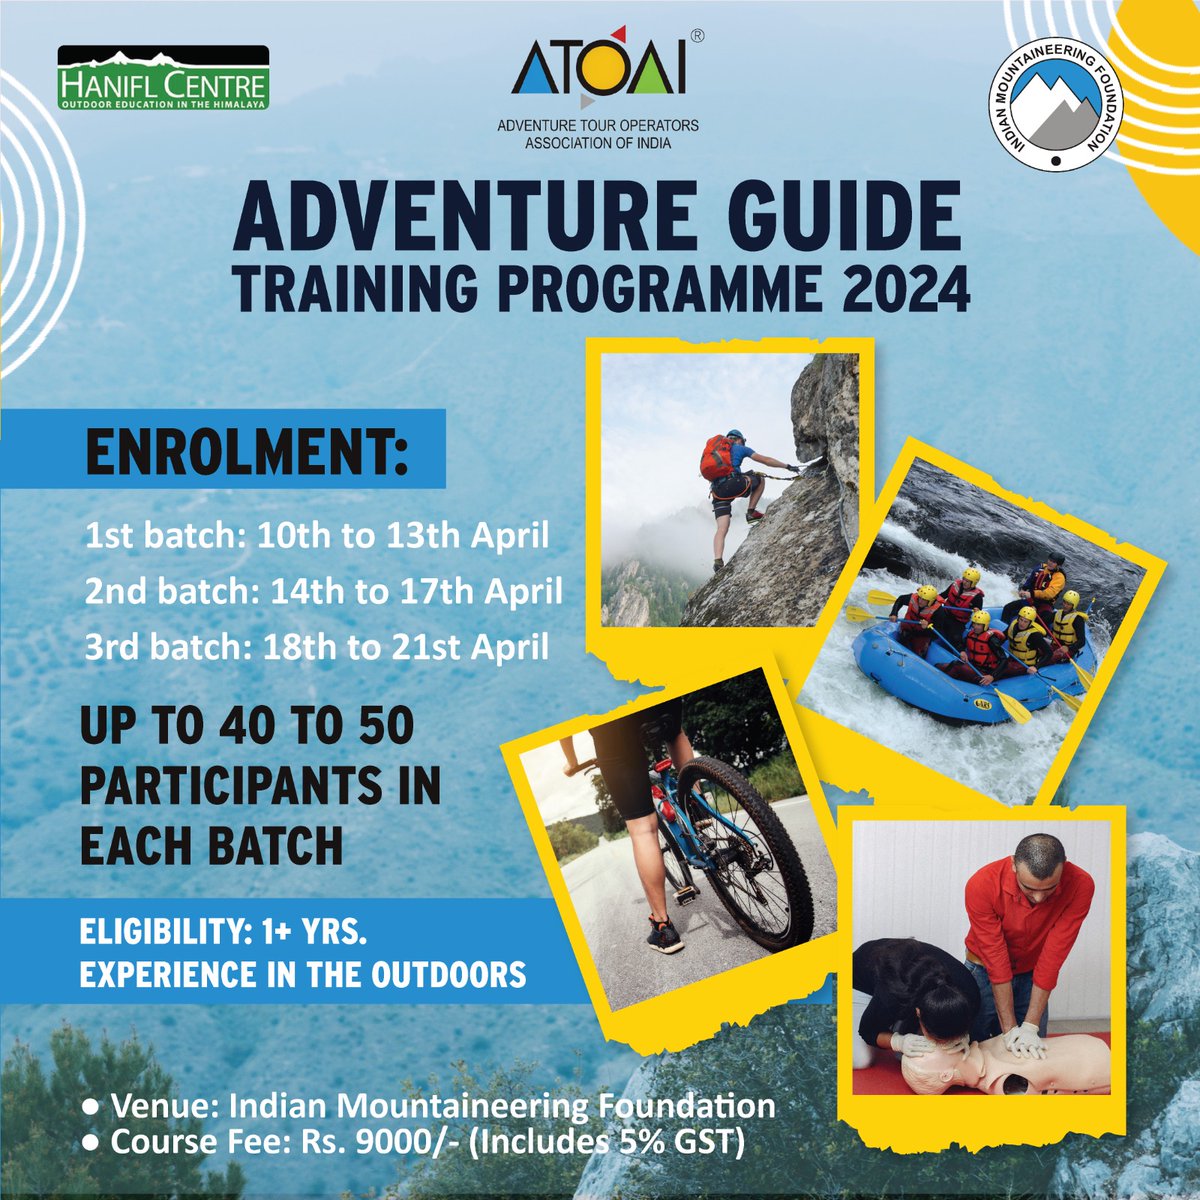 Hurry! Slots are filling fast! Don't miss out on this exclusive Adventure Guide Training Programme 2024. 🔗 Register here: forms.gle/gDYNuj2QbDkt5f… atoai.india@gmail.com #AdventureTraining #ProfessionalDevelopment #ATOAI #AdventureSkills #SlotsFillingFast #RegisterNow